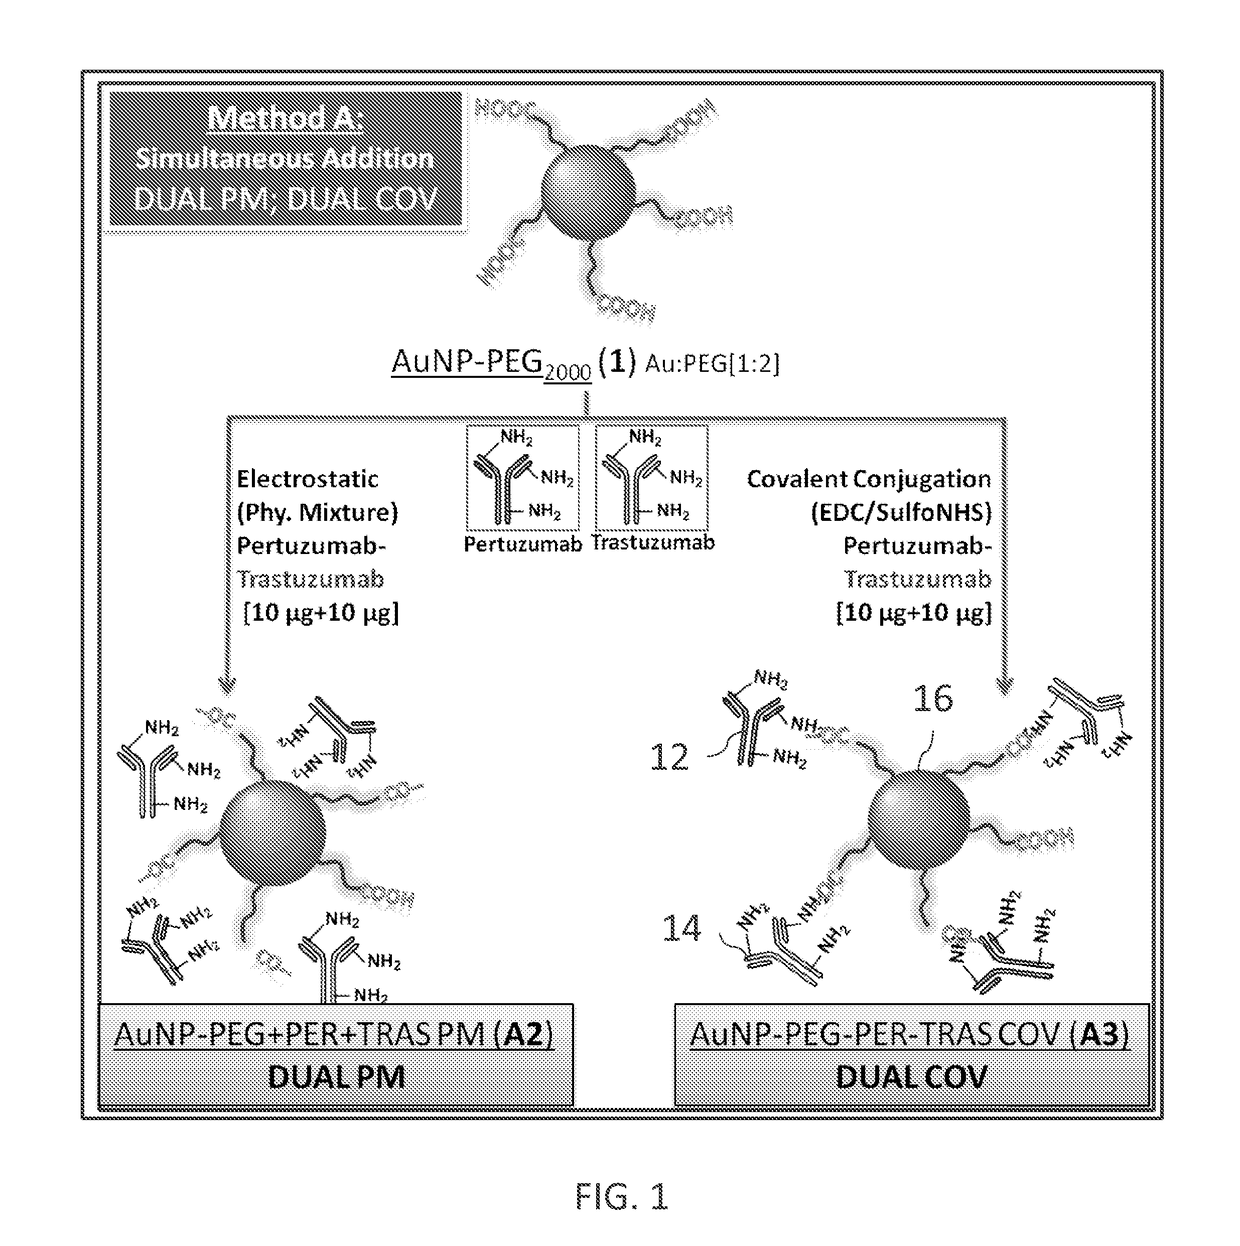 Multiple human antibody-nanoparticle conjugates and methods of formation